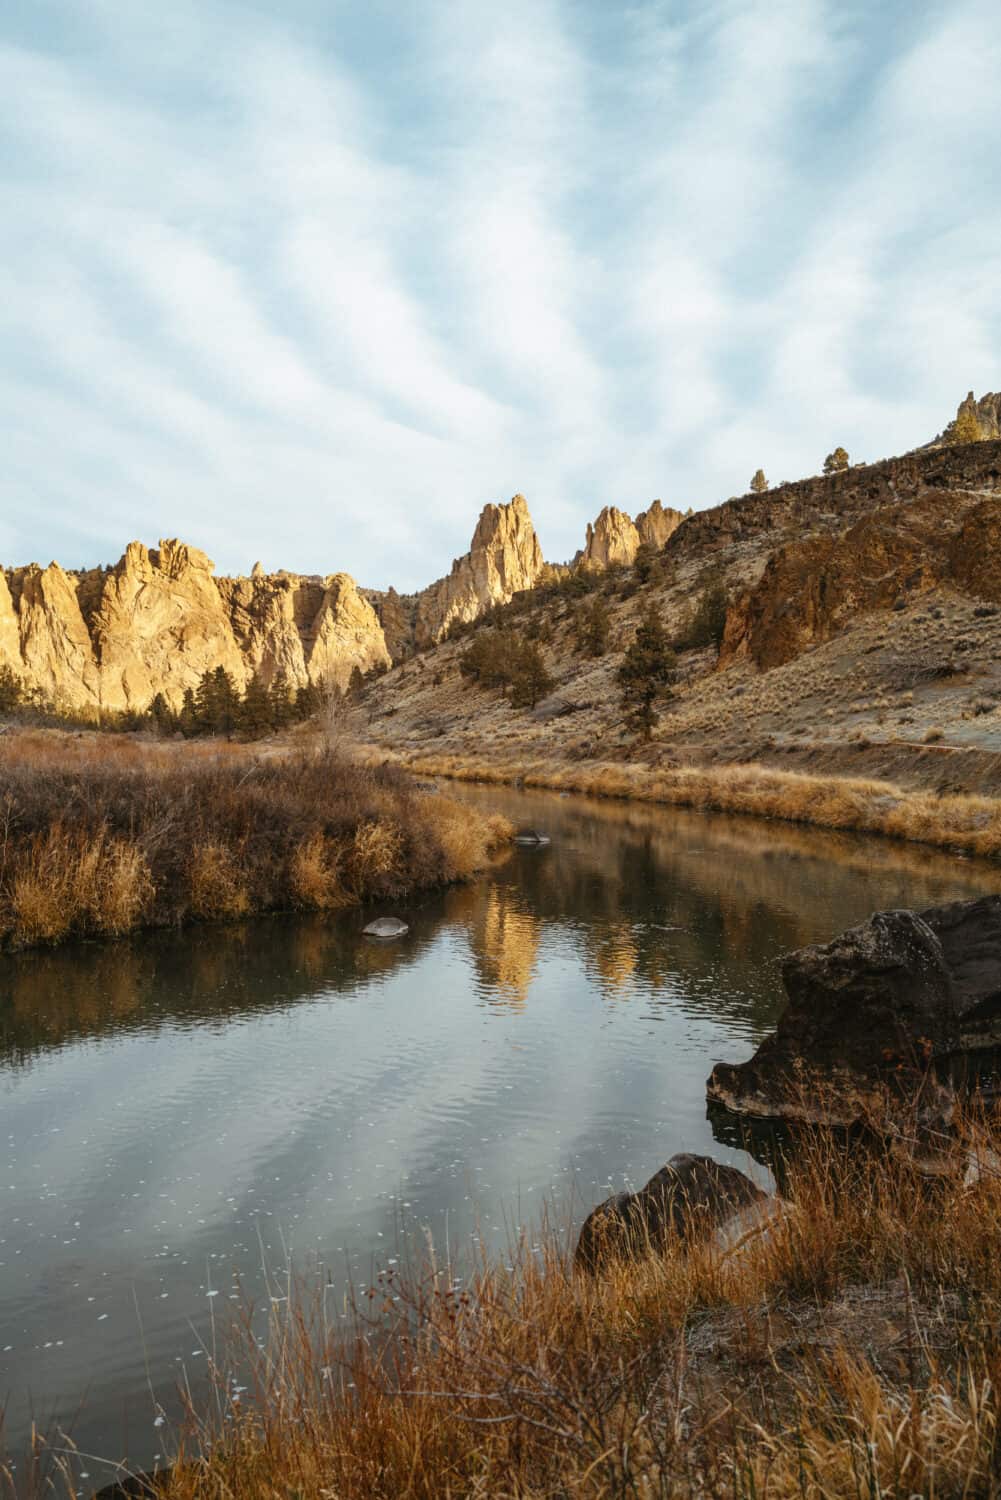 Hikes at Smith Rock State Park